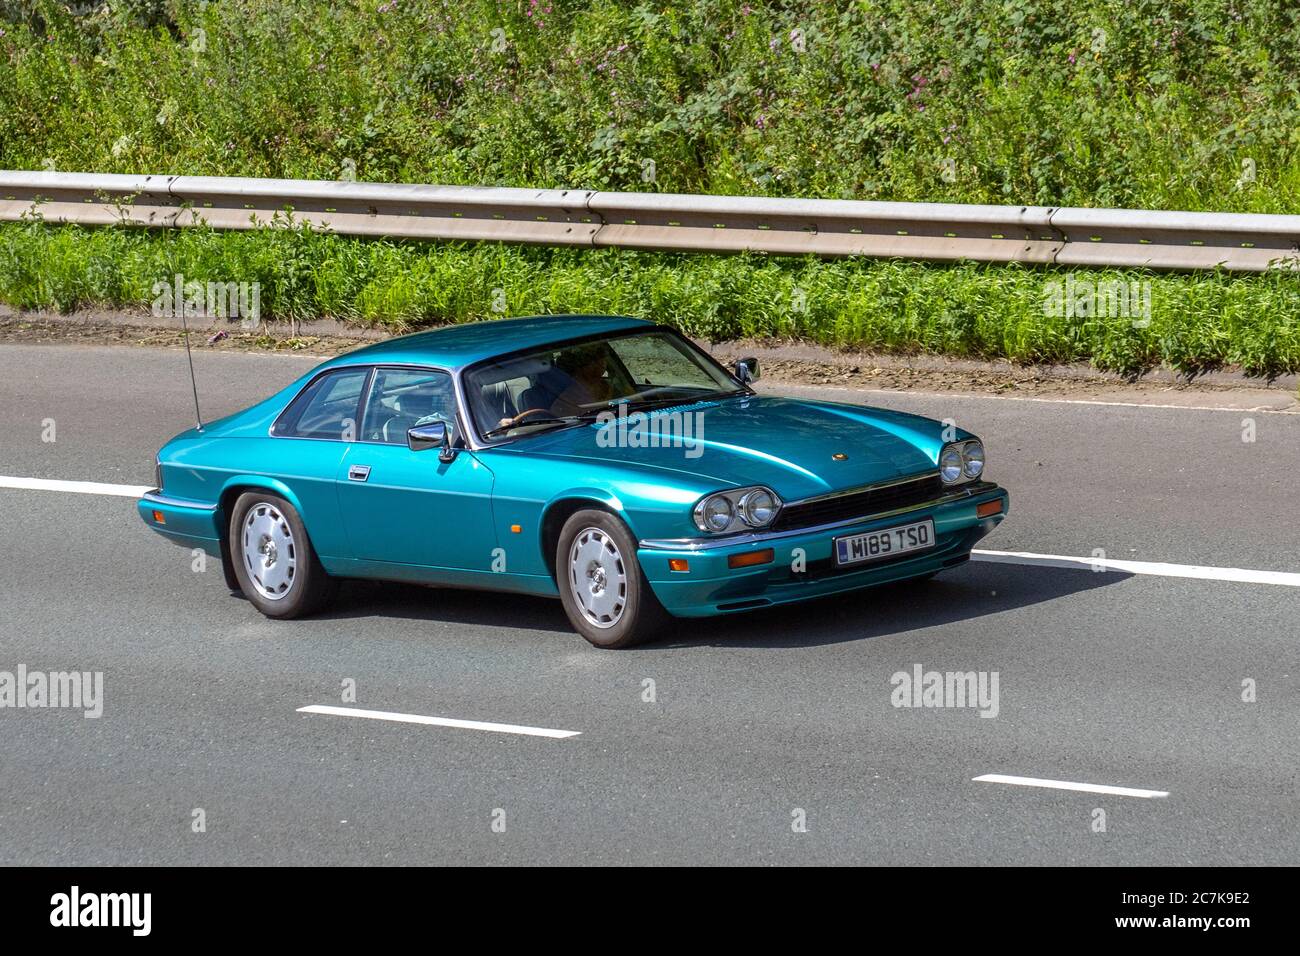 1995 Turquoise Jaguar Xj-S 4.0 Auto; Vehicular traffic moving vehicles, cars driving vehicle on UK roads, 90s motors, motoring on the M6 motorway highway network. Stock Photo